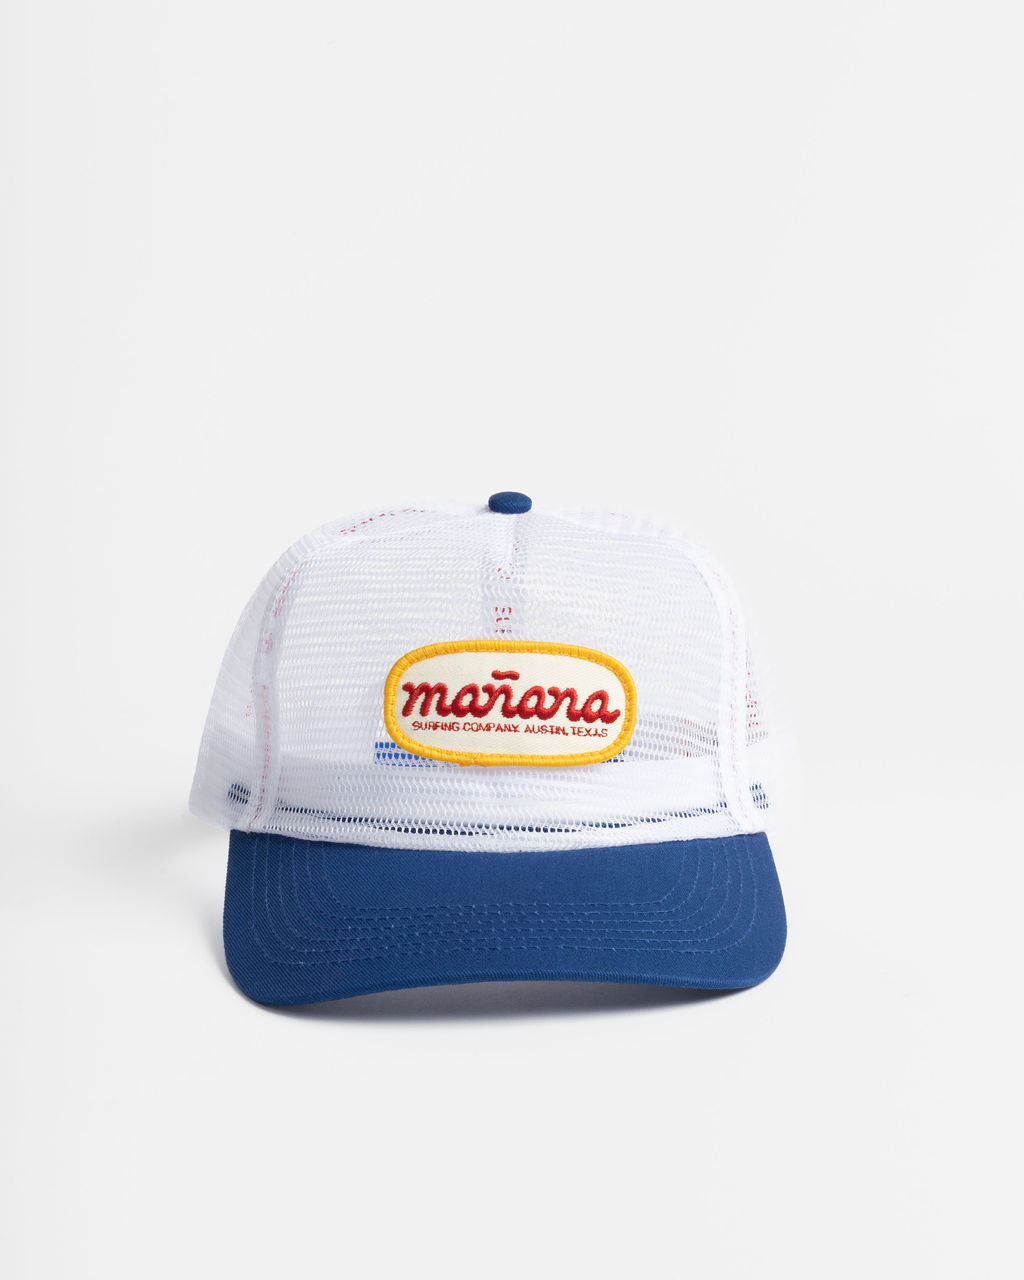 a picture of mesh hat with Manana written on it